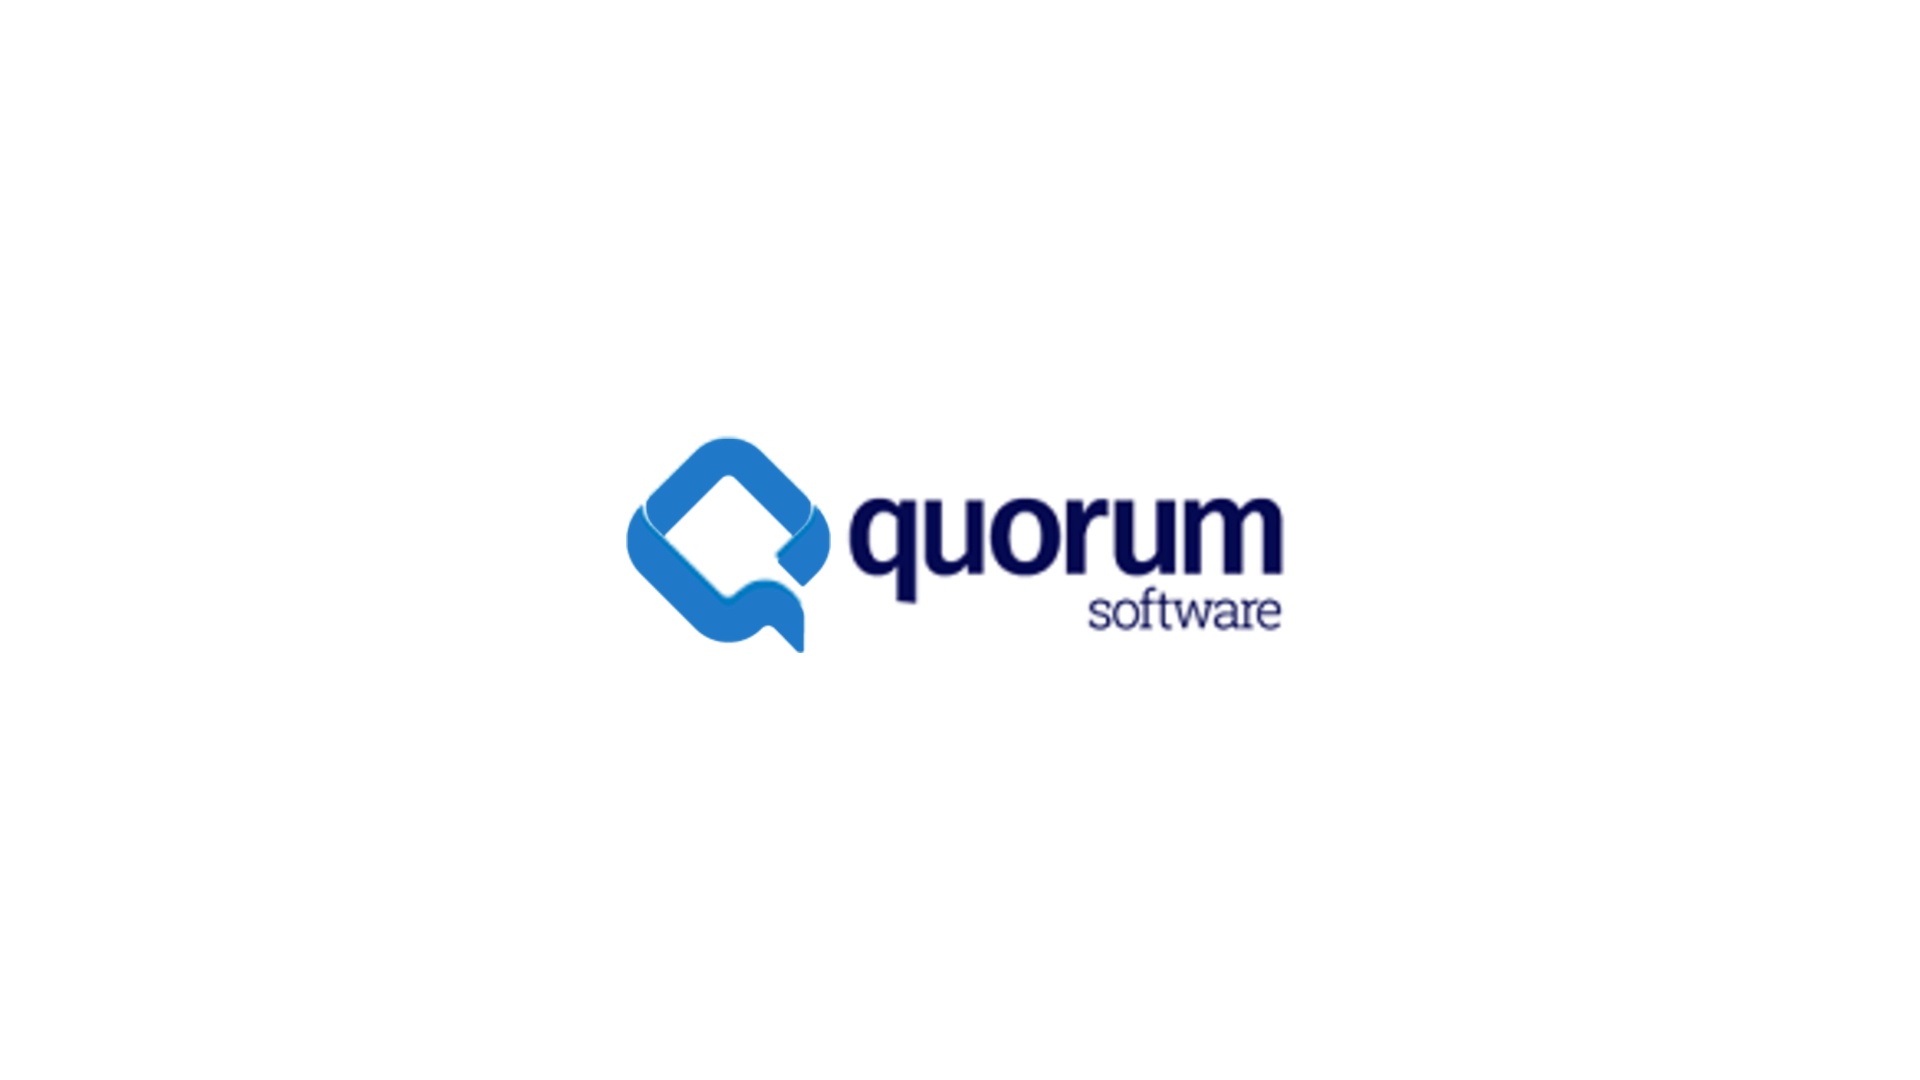 Quorum Software Recognized as a 2018 HFS Hot Vendor by Top Global Research Firm